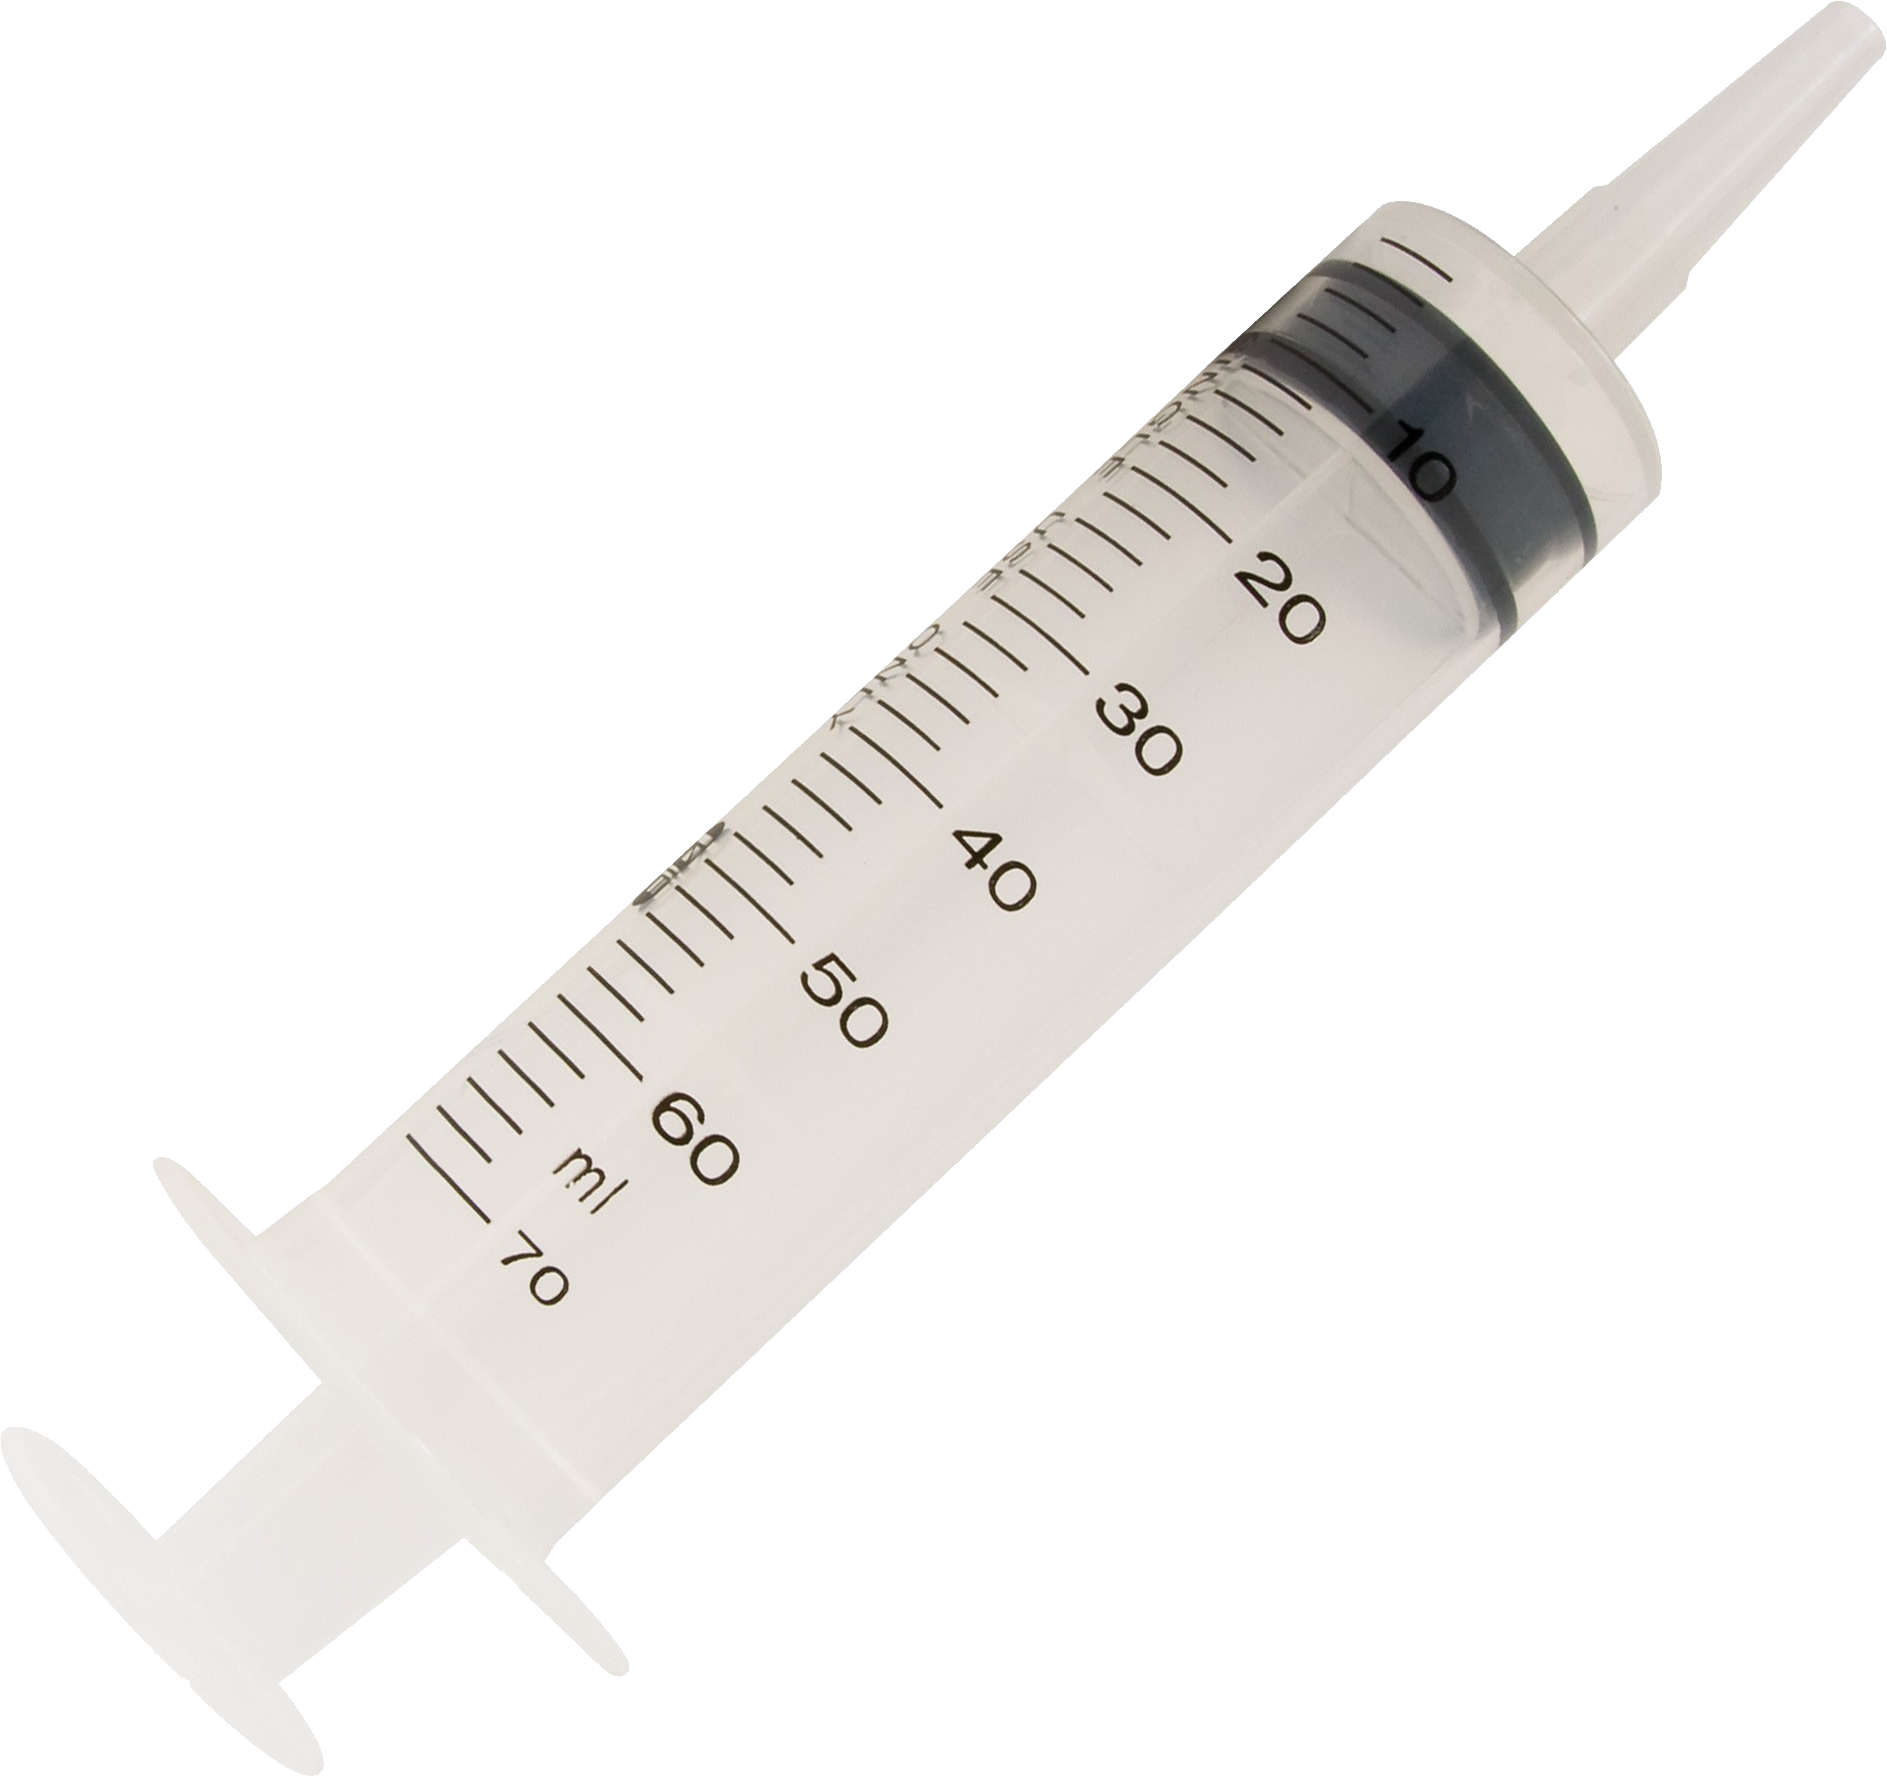 Shot clipart hypodermic needle. Pictures posters news and